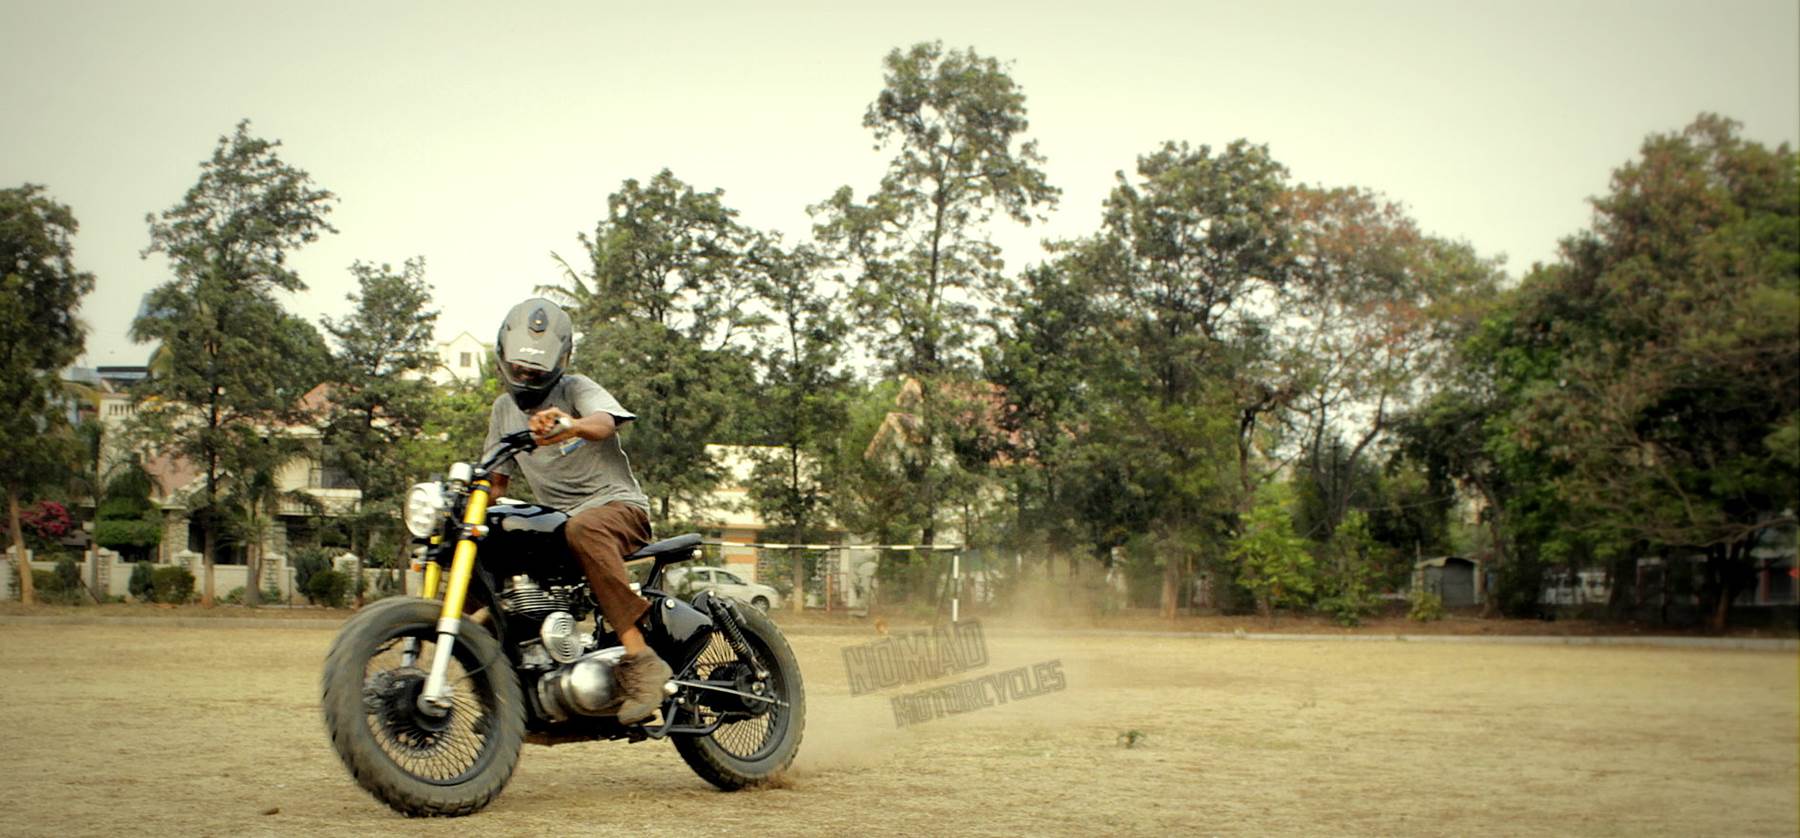 Modified Royal Enfield Scrambler off roading~ Nomad Motorcycles